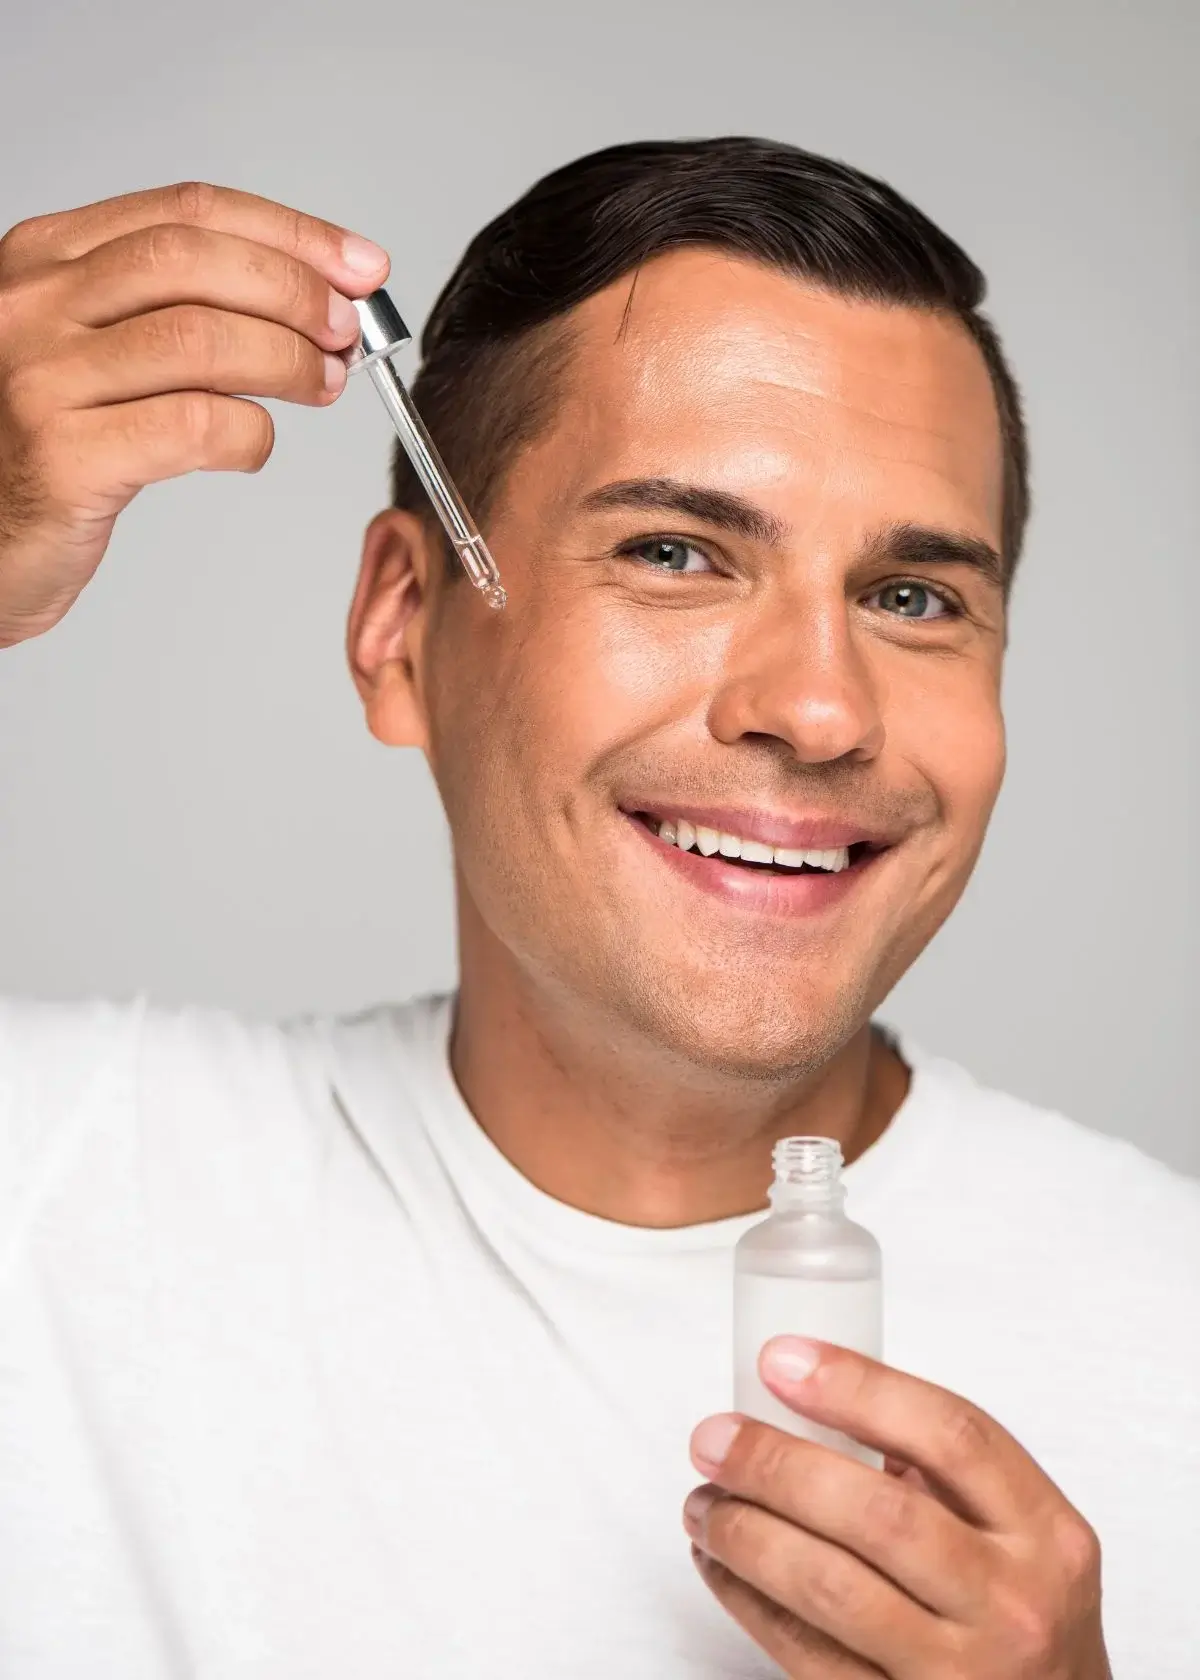 What is retinol and what does it do for men's skin?